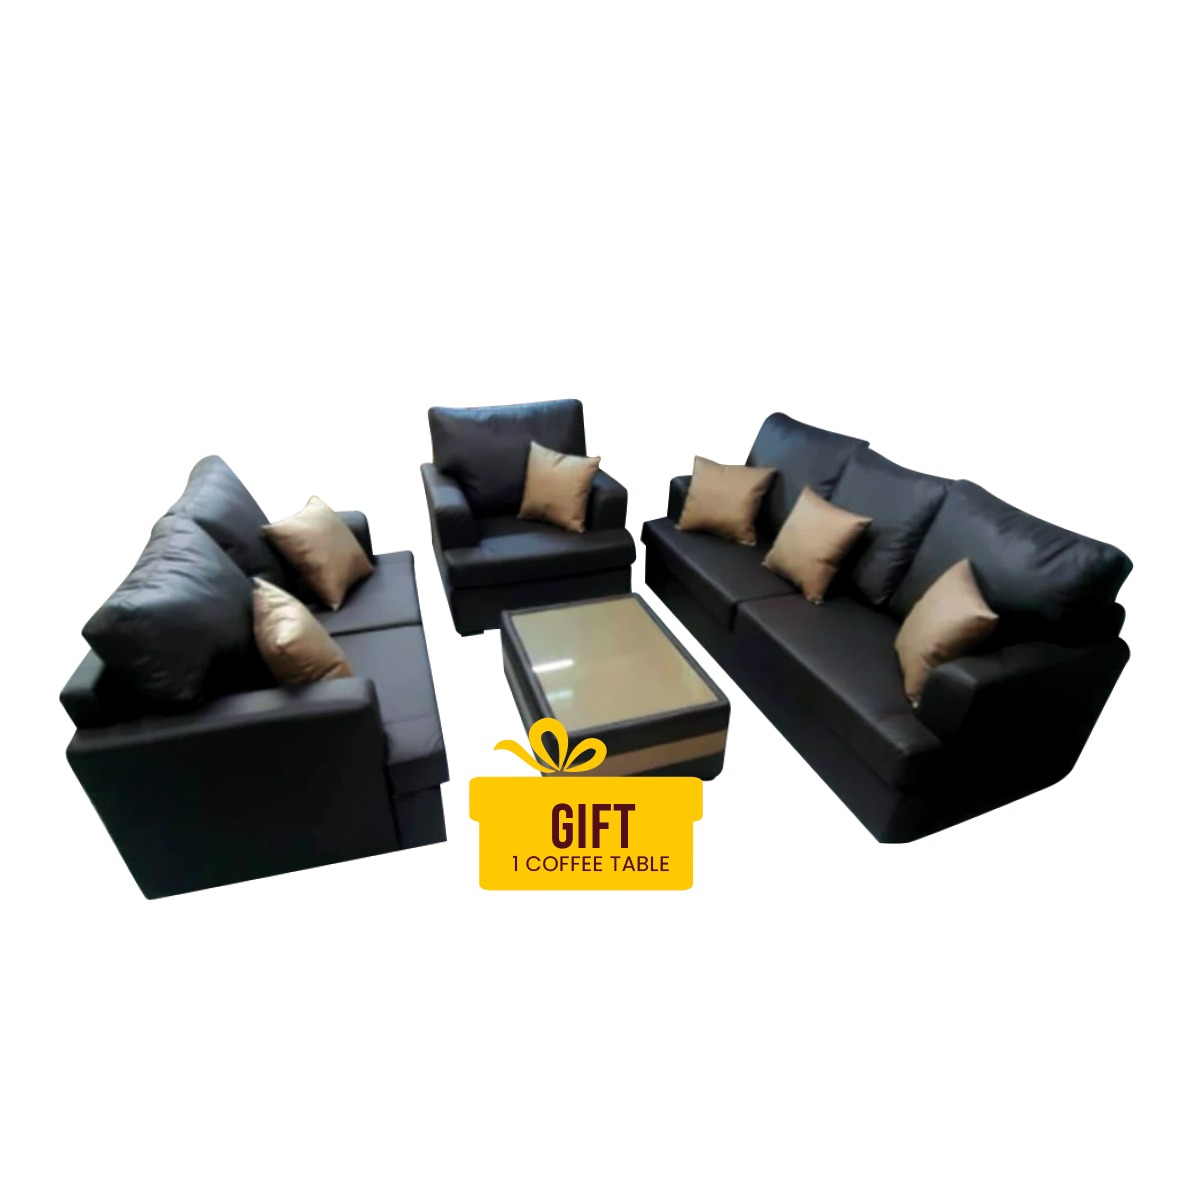 Cader Electromeubles - Roma 3 2 1 with Coffee table Rs 38900